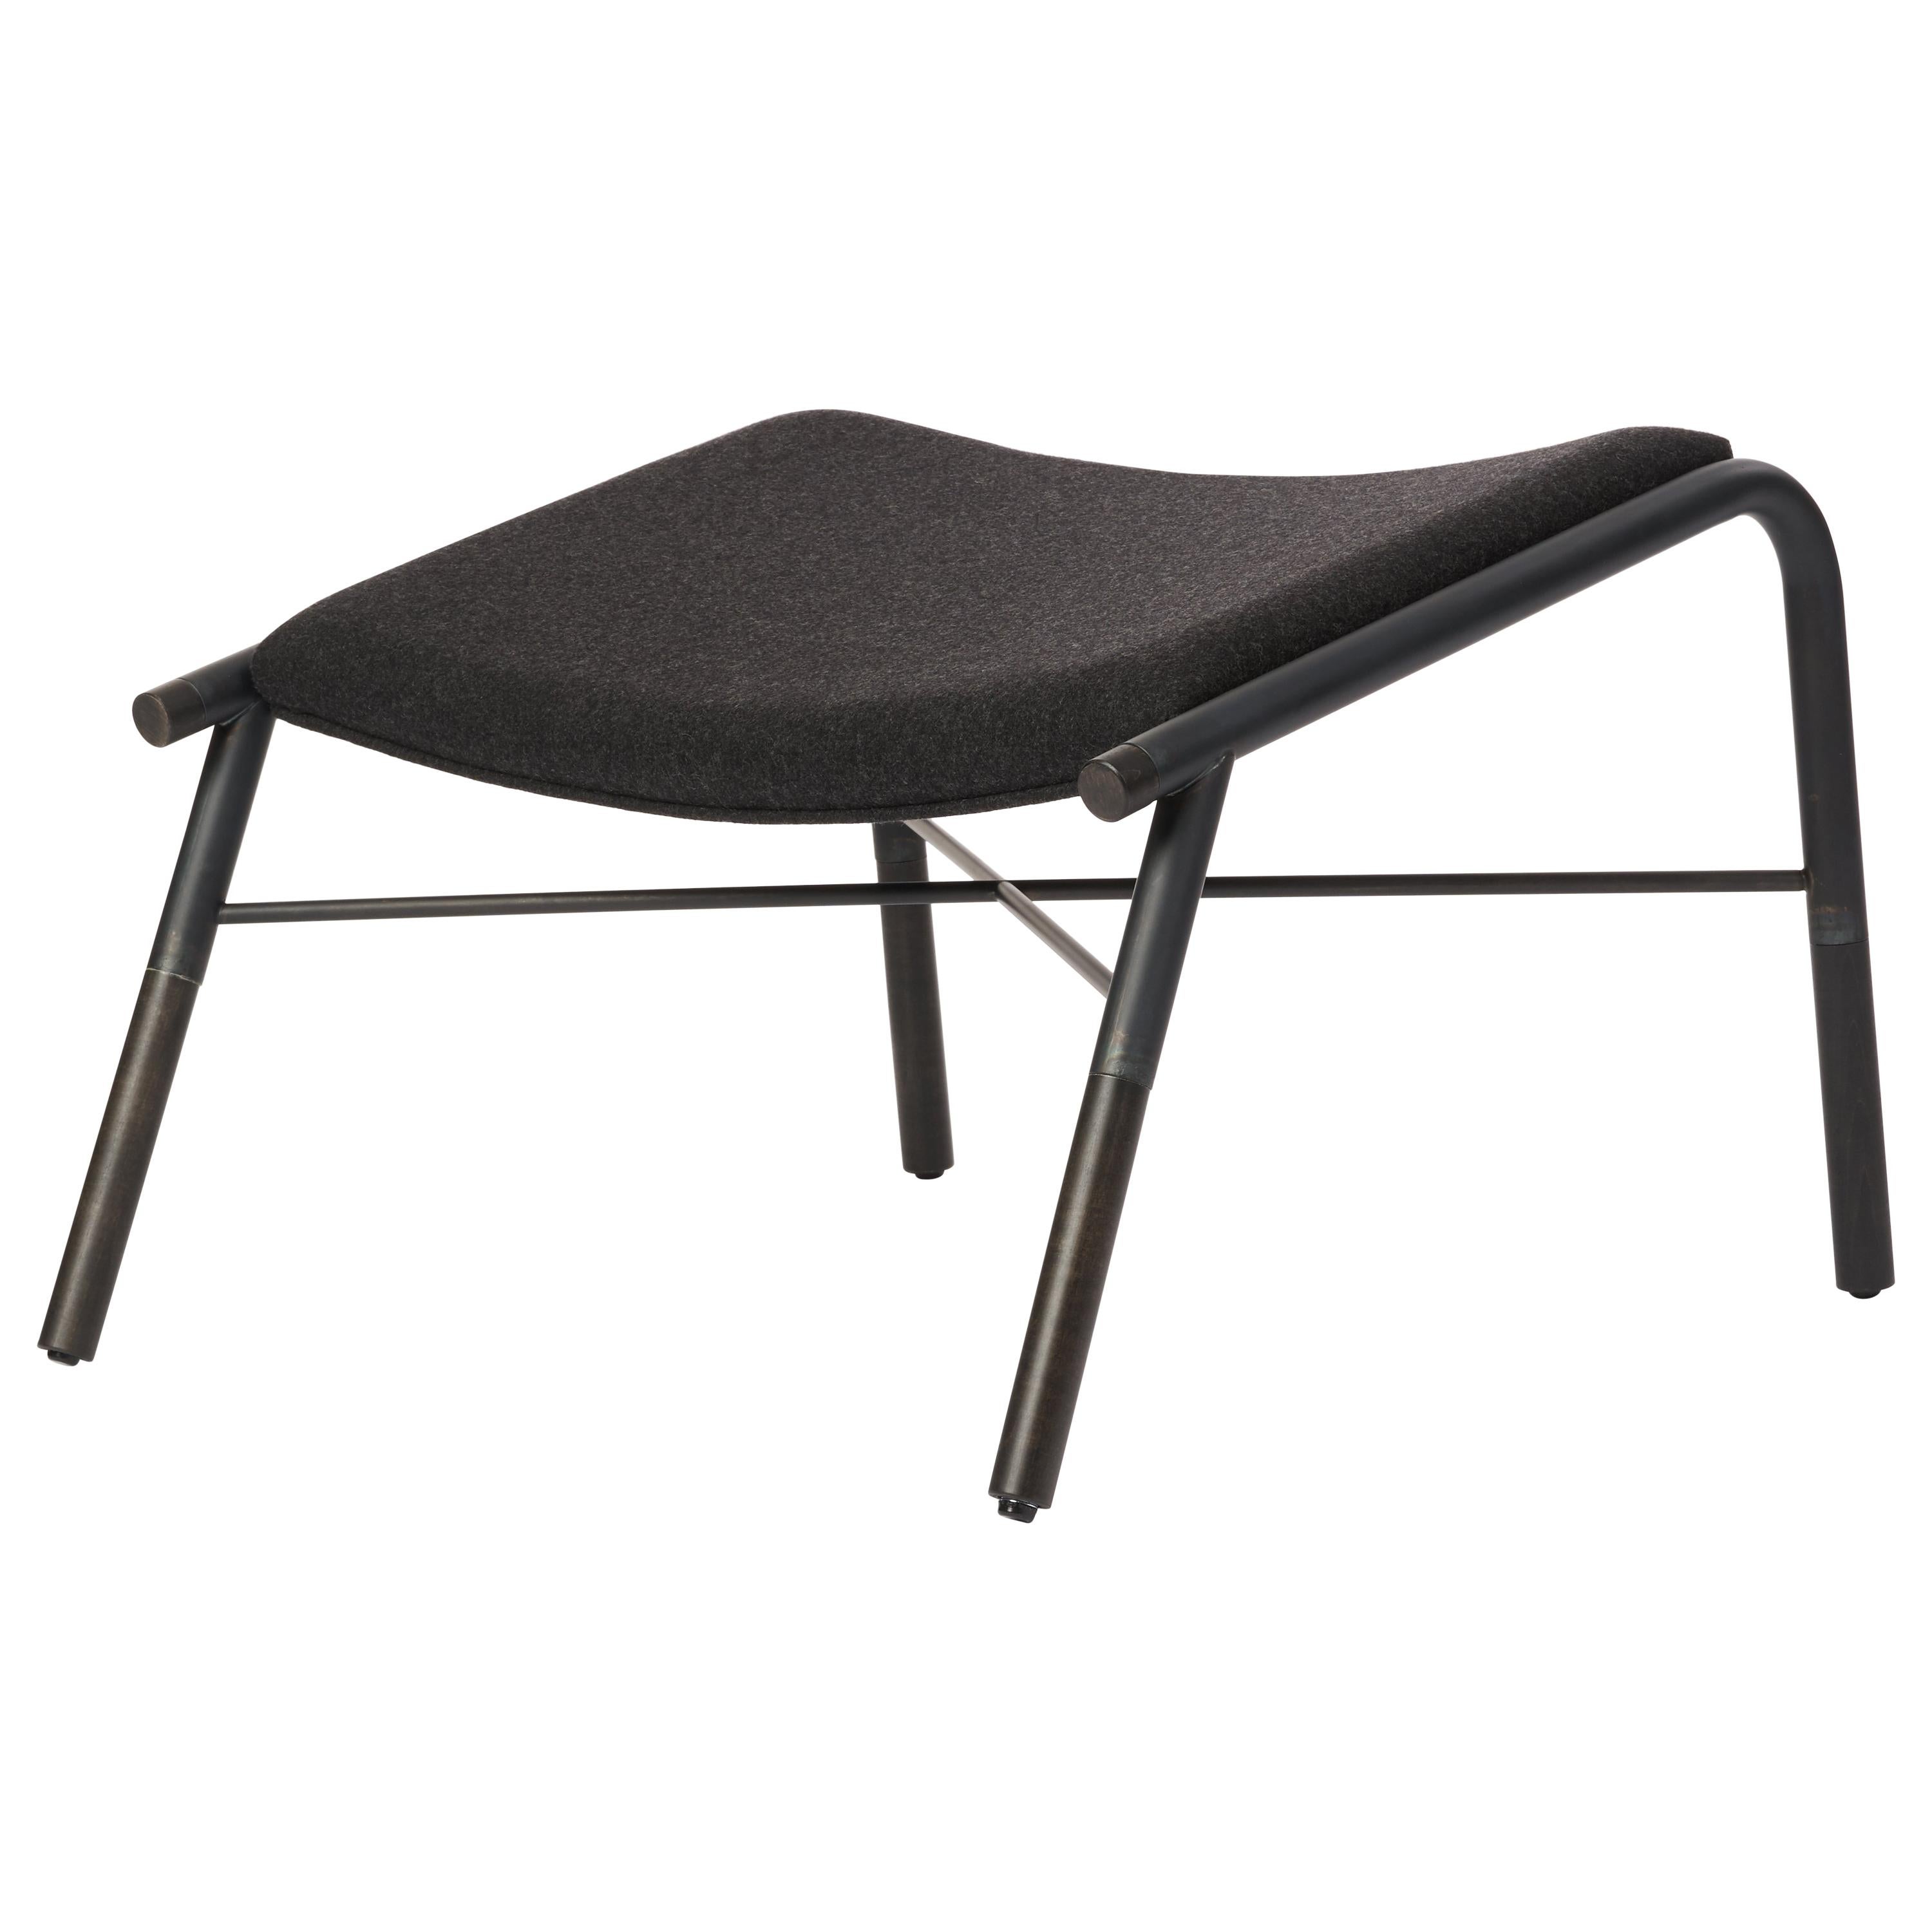 49N Lounge Chair Ottoman, Melton Wool and Eco-Friendly Powder Coated Steel Frame For Sale